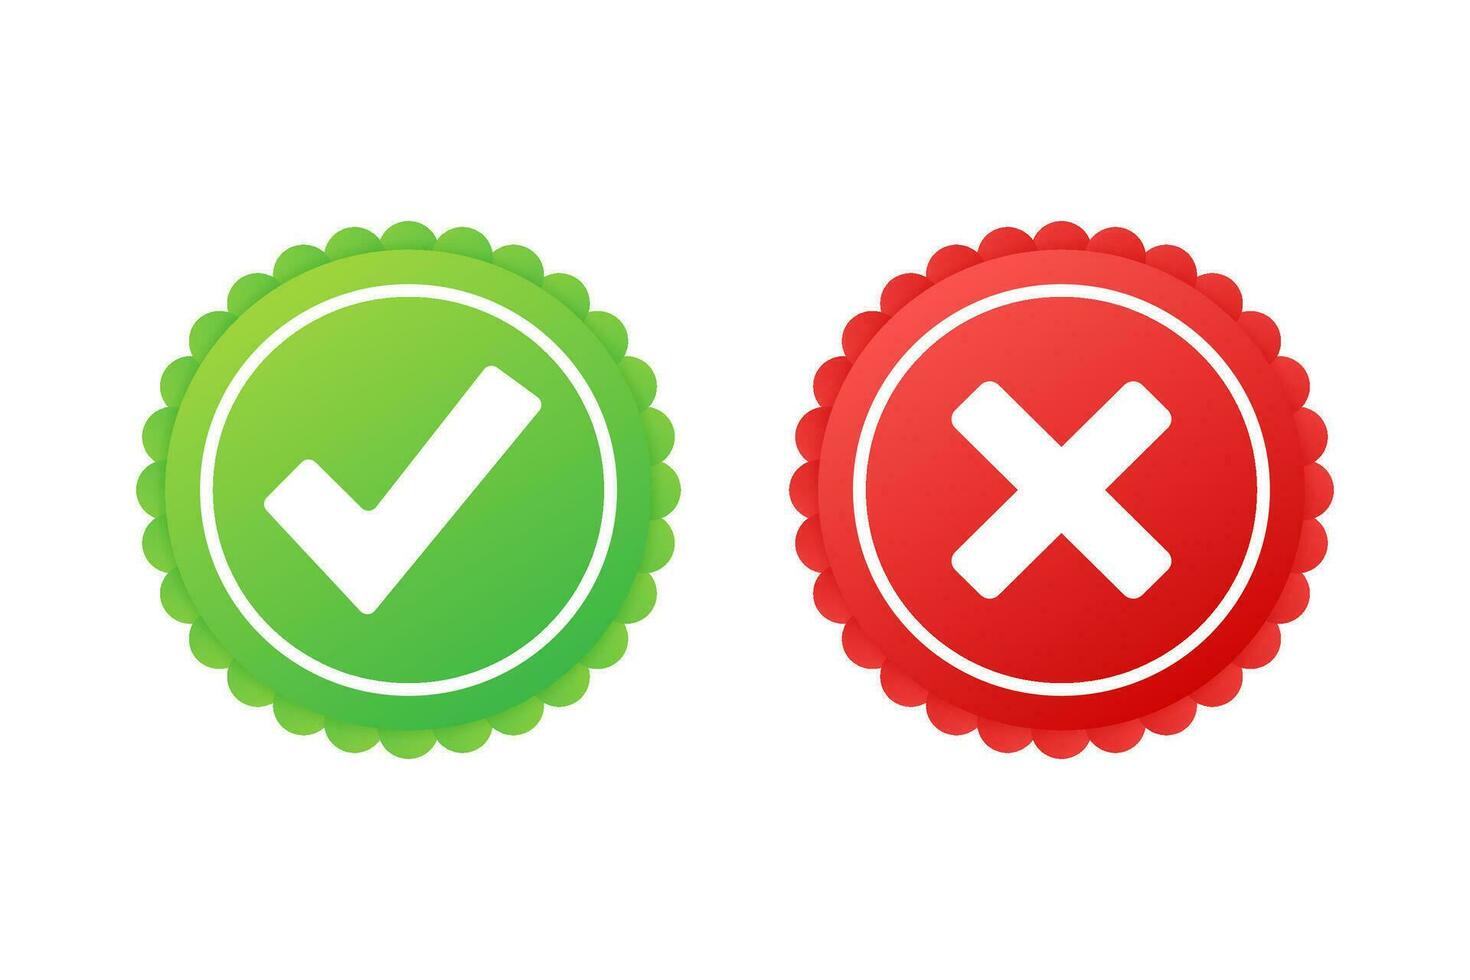 Tick and cross signs. Green checkmark OK and red X icon. Symbols YES and NO button for vote. Vector stock illustration.